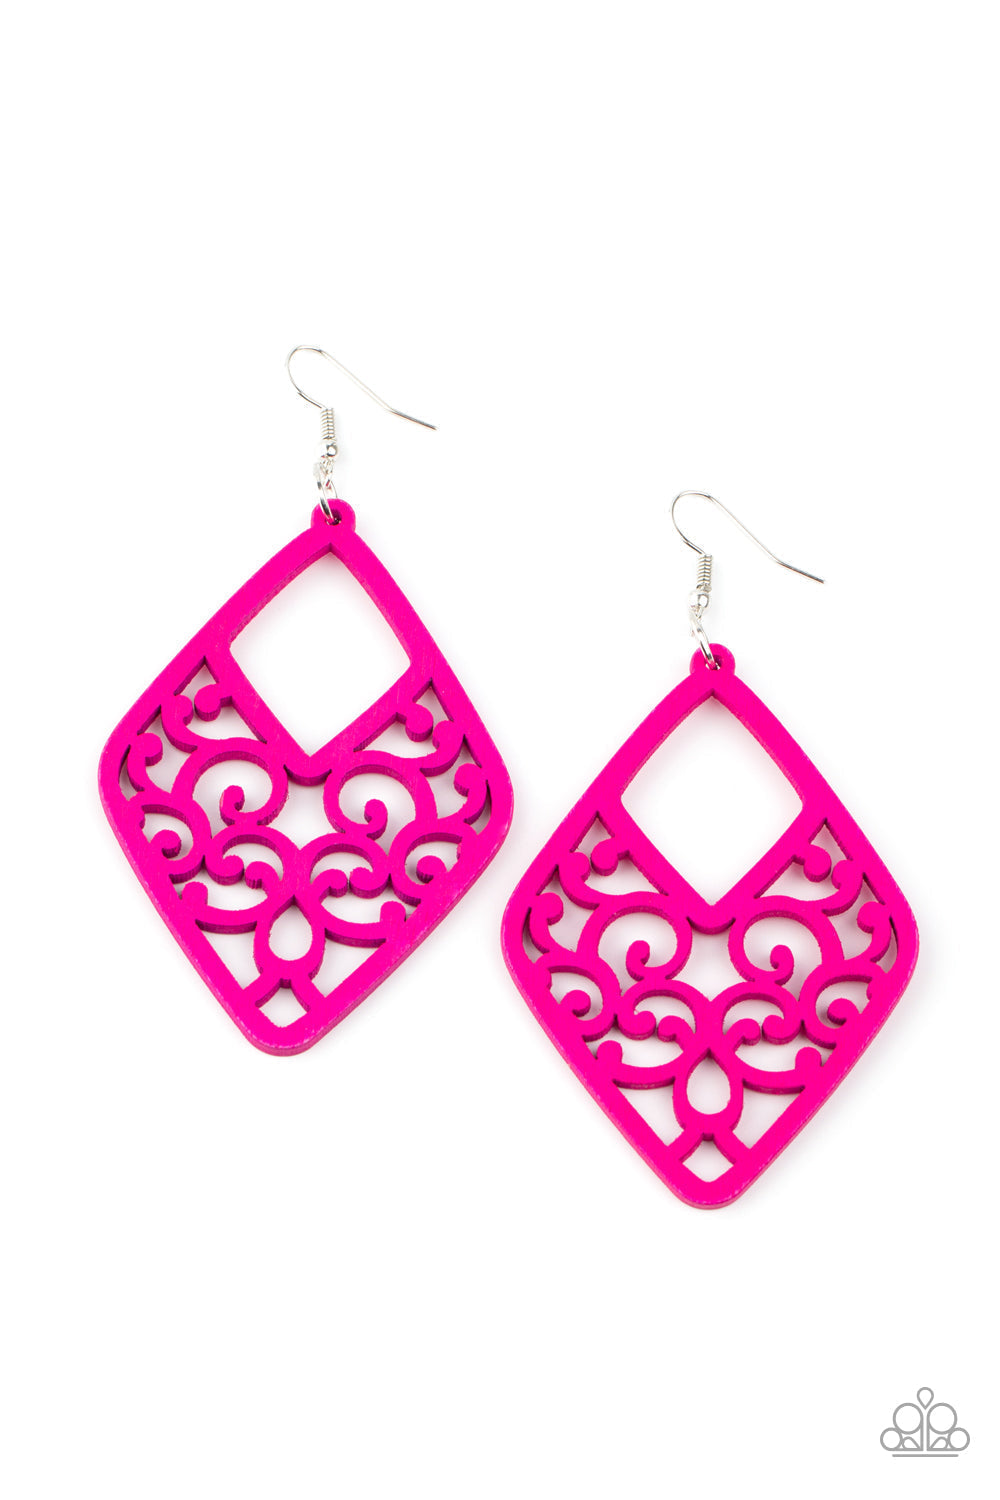 VINE For The Taking - Pink Wood Earrings - Paparazzi Accessories - Brushed in a flamboyant Pink Peacock finish, wooden vine-like filigree climbs an airy kite-shaped frame for a seasonal vibe. Earring attaches to a standard fishhook fitting. Sold as one pair of earrings. Trendy fashion jewelry for everyone.